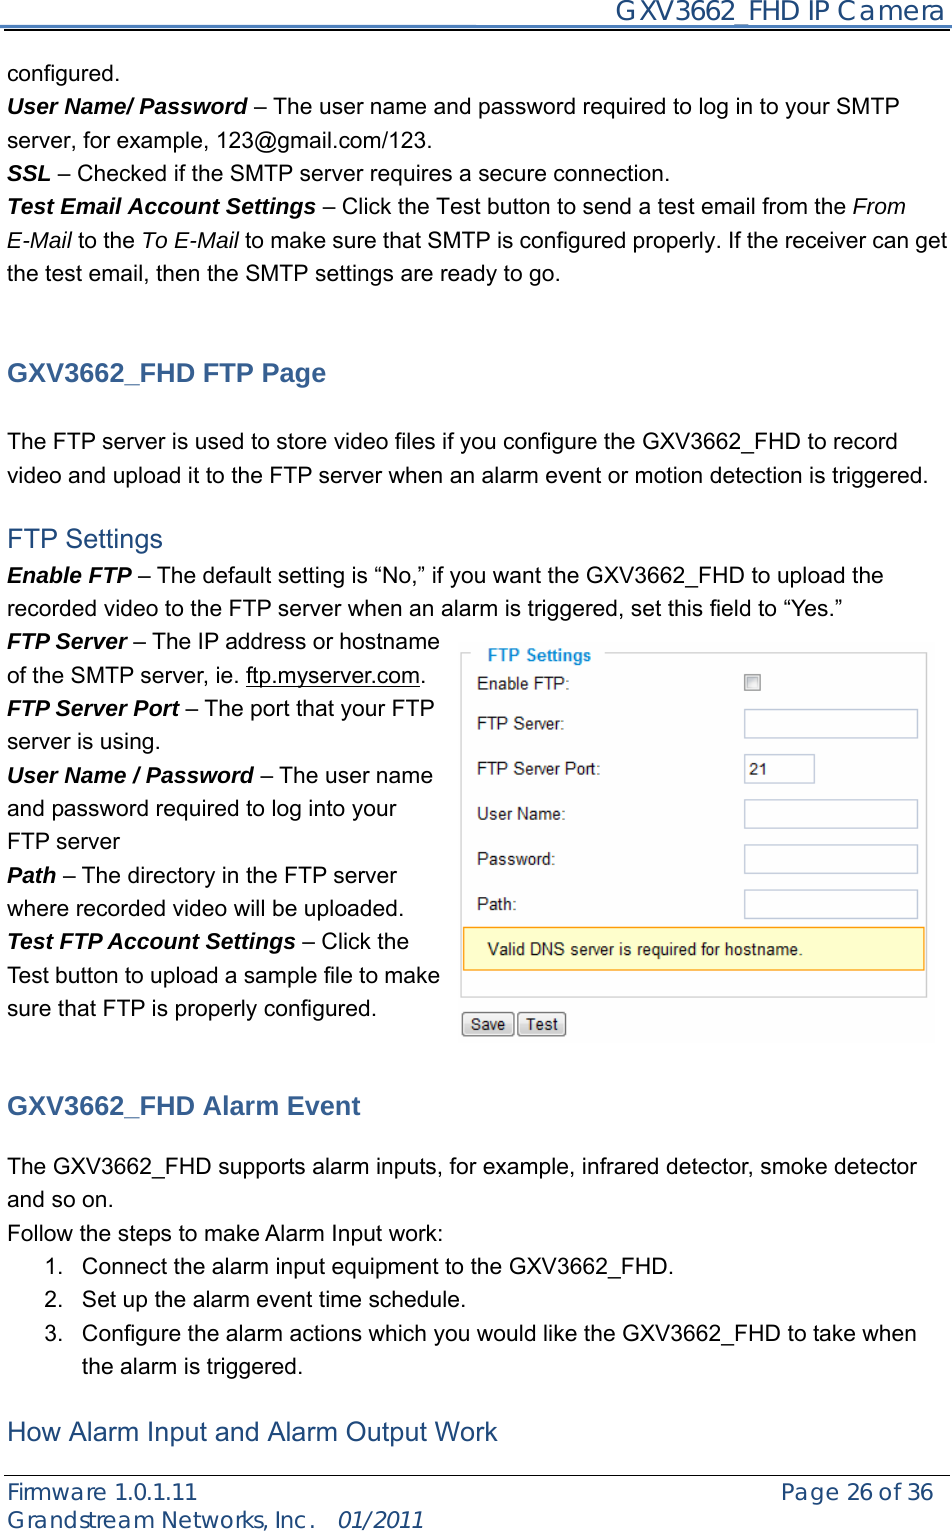     GXV3662_FHD IP Camera Firmware 1.0.1.11                                                   Page 26 of 36     Grandstream Networks, Inc.  01/2011  configured. User Name/ Password – The user name and password required to log in to your SMTP server, for example, 123@gmail.com/123. SSL – Checked if the SMTP server requires a secure connection. Test Email Account Settings – Click the Test button to send a test email from the From E-Mail to the To E-Mail to make sure that SMTP is configured properly. If the receiver can get the test email, then the SMTP settings are ready to go.     GXV3662_FHD FTP Page  The FTP server is used to store video files if you configure the GXV3662_FHD to record video and upload it to the FTP server when an alarm event or motion detection is triggered.  FTP Settings Enable FTP – The default setting is “No,” if you want the GXV3662_FHD to upload the recorded video to the FTP server when an alarm is triggered, set this field to “Yes.” FTP Server – The IP address or hostname of the SMTP server, ie. ftp.myserver.com. FTP Server Port – The port that your FTP server is using. User Name / Password – The user name and password required to log into your FTP server Path – The directory in the FTP server where recorded video will be uploaded. Test FTP Account Settings – Click the Test button to upload a sample file to make sure that FTP is properly configured.   GXV3662_FHD Alarm Event    The GXV3662_FHD supports alarm inputs, for example, infrared detector, smoke detector and so on.     Follow the steps to make Alarm Input work: 1.  Connect the alarm input equipment to the GXV3662_FHD. 2.  Set up the alarm event time schedule. 3.  Configure the alarm actions which you would like the GXV3662_FHD to take when the alarm is triggered.  How Alarm Input and Alarm Output Work 